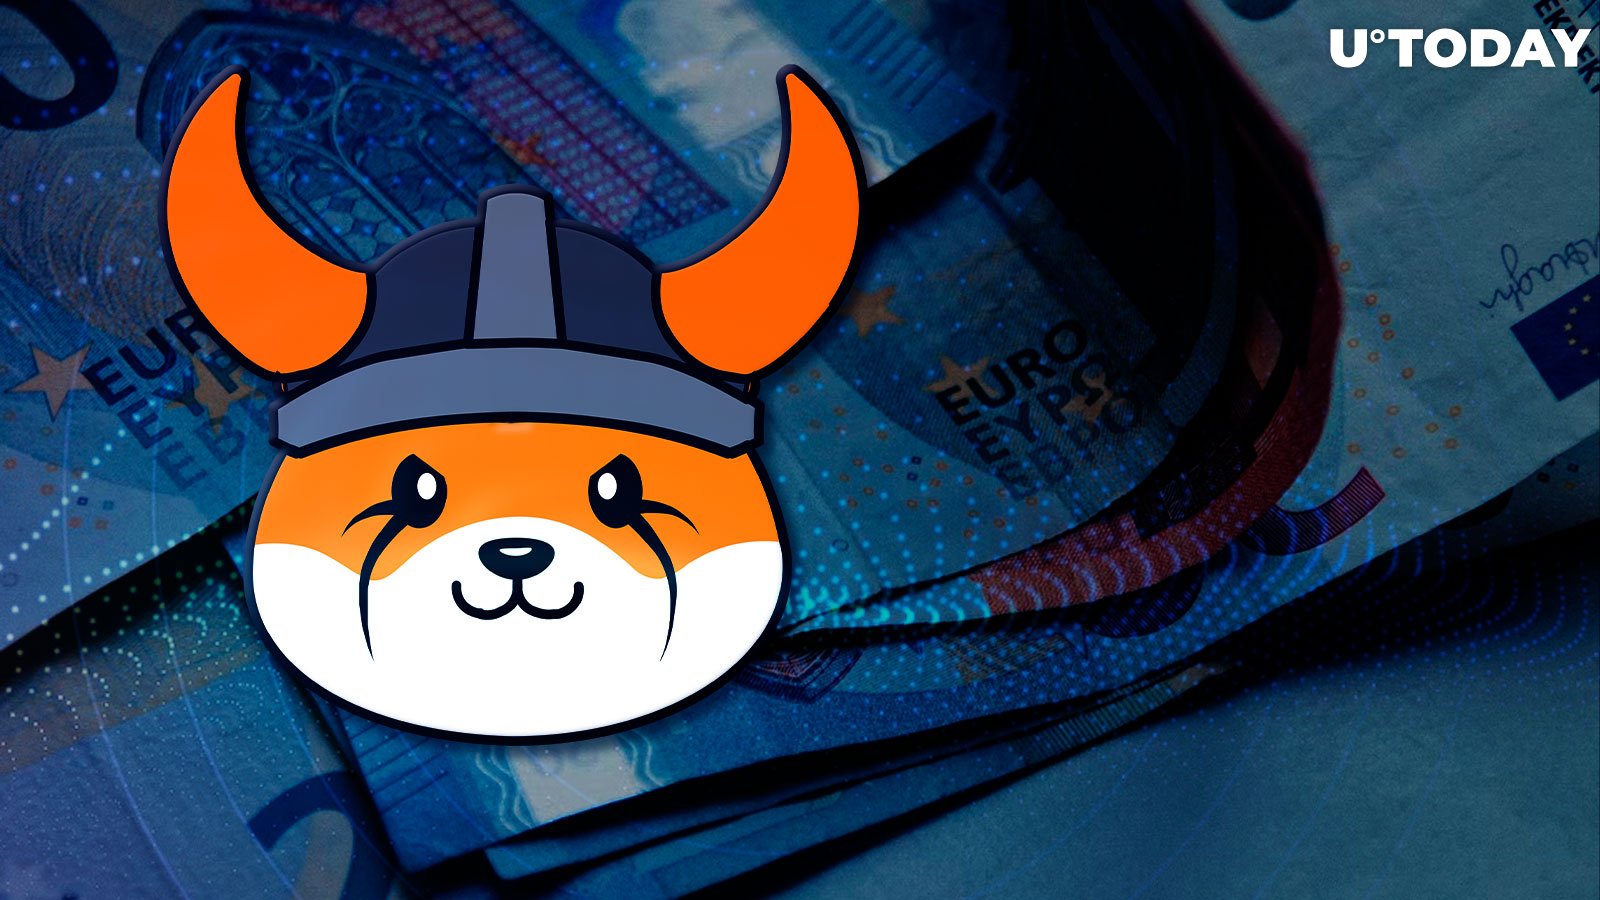 Dogecoin Offshoot Floki Inu Gets Its First Euro Listing